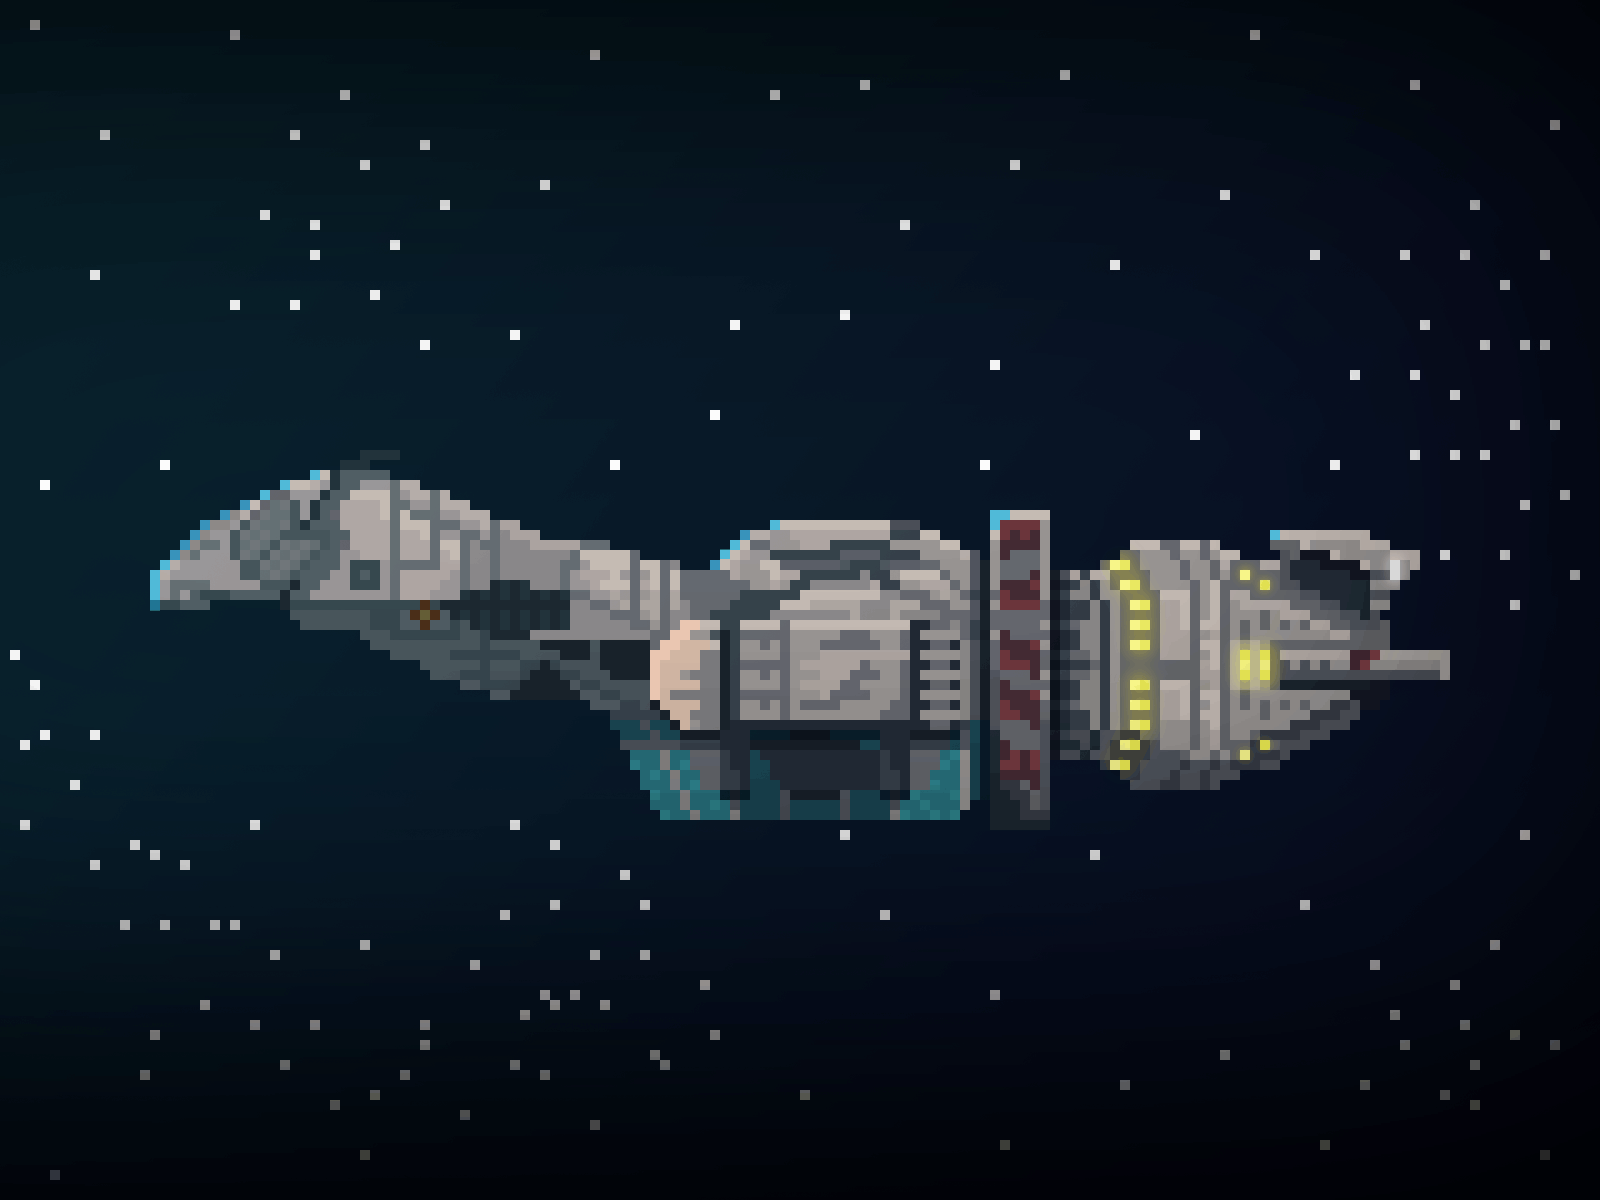 Serenity from Firefly [Pixel Art]